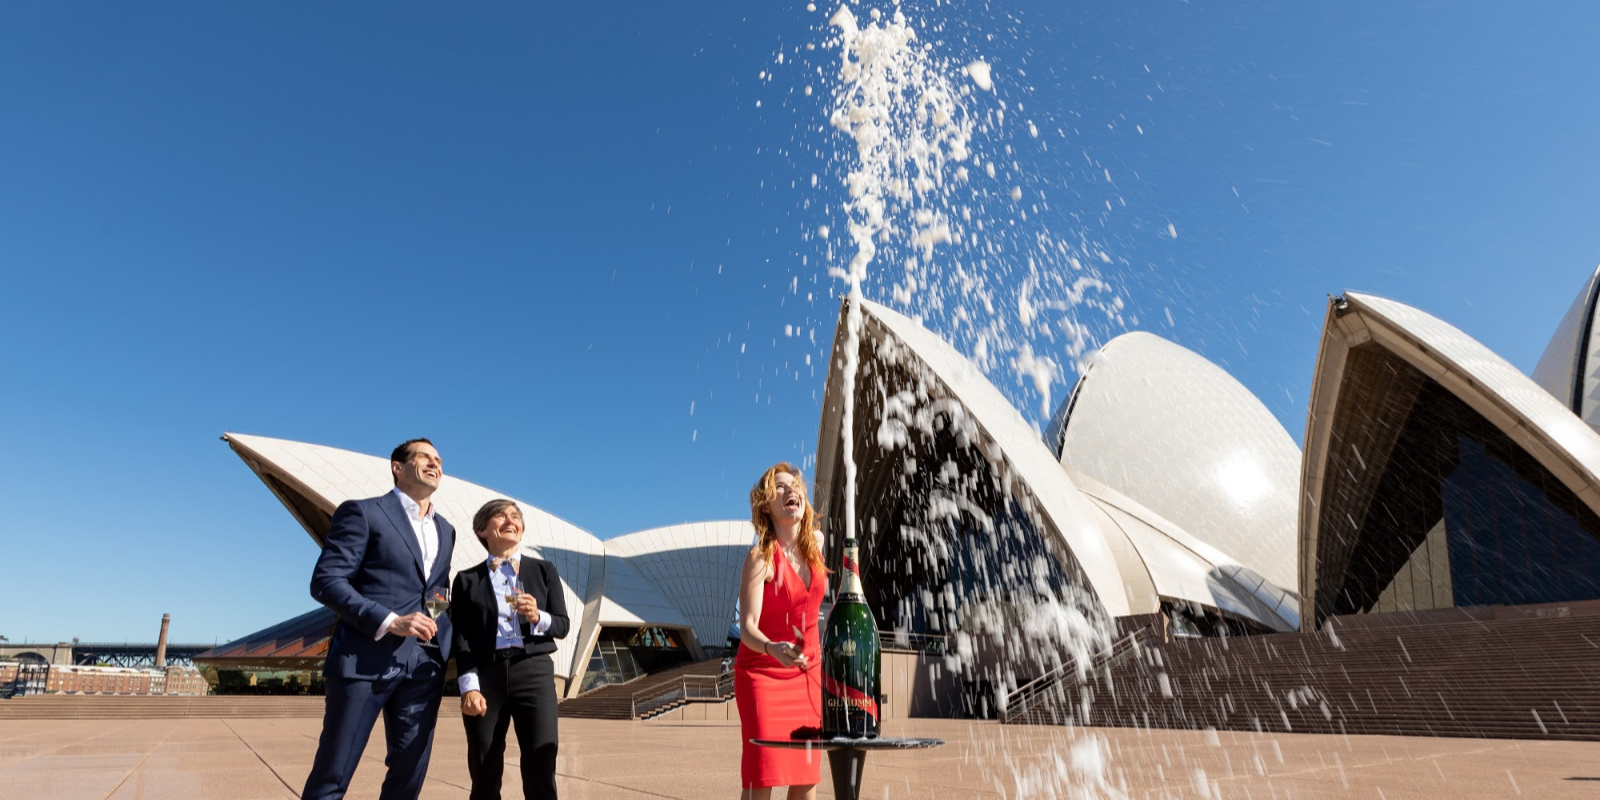 A woman in a red dress and two people in suits standing outside the Sydney opera House, watching a bottle of Champaigne spray into the air.